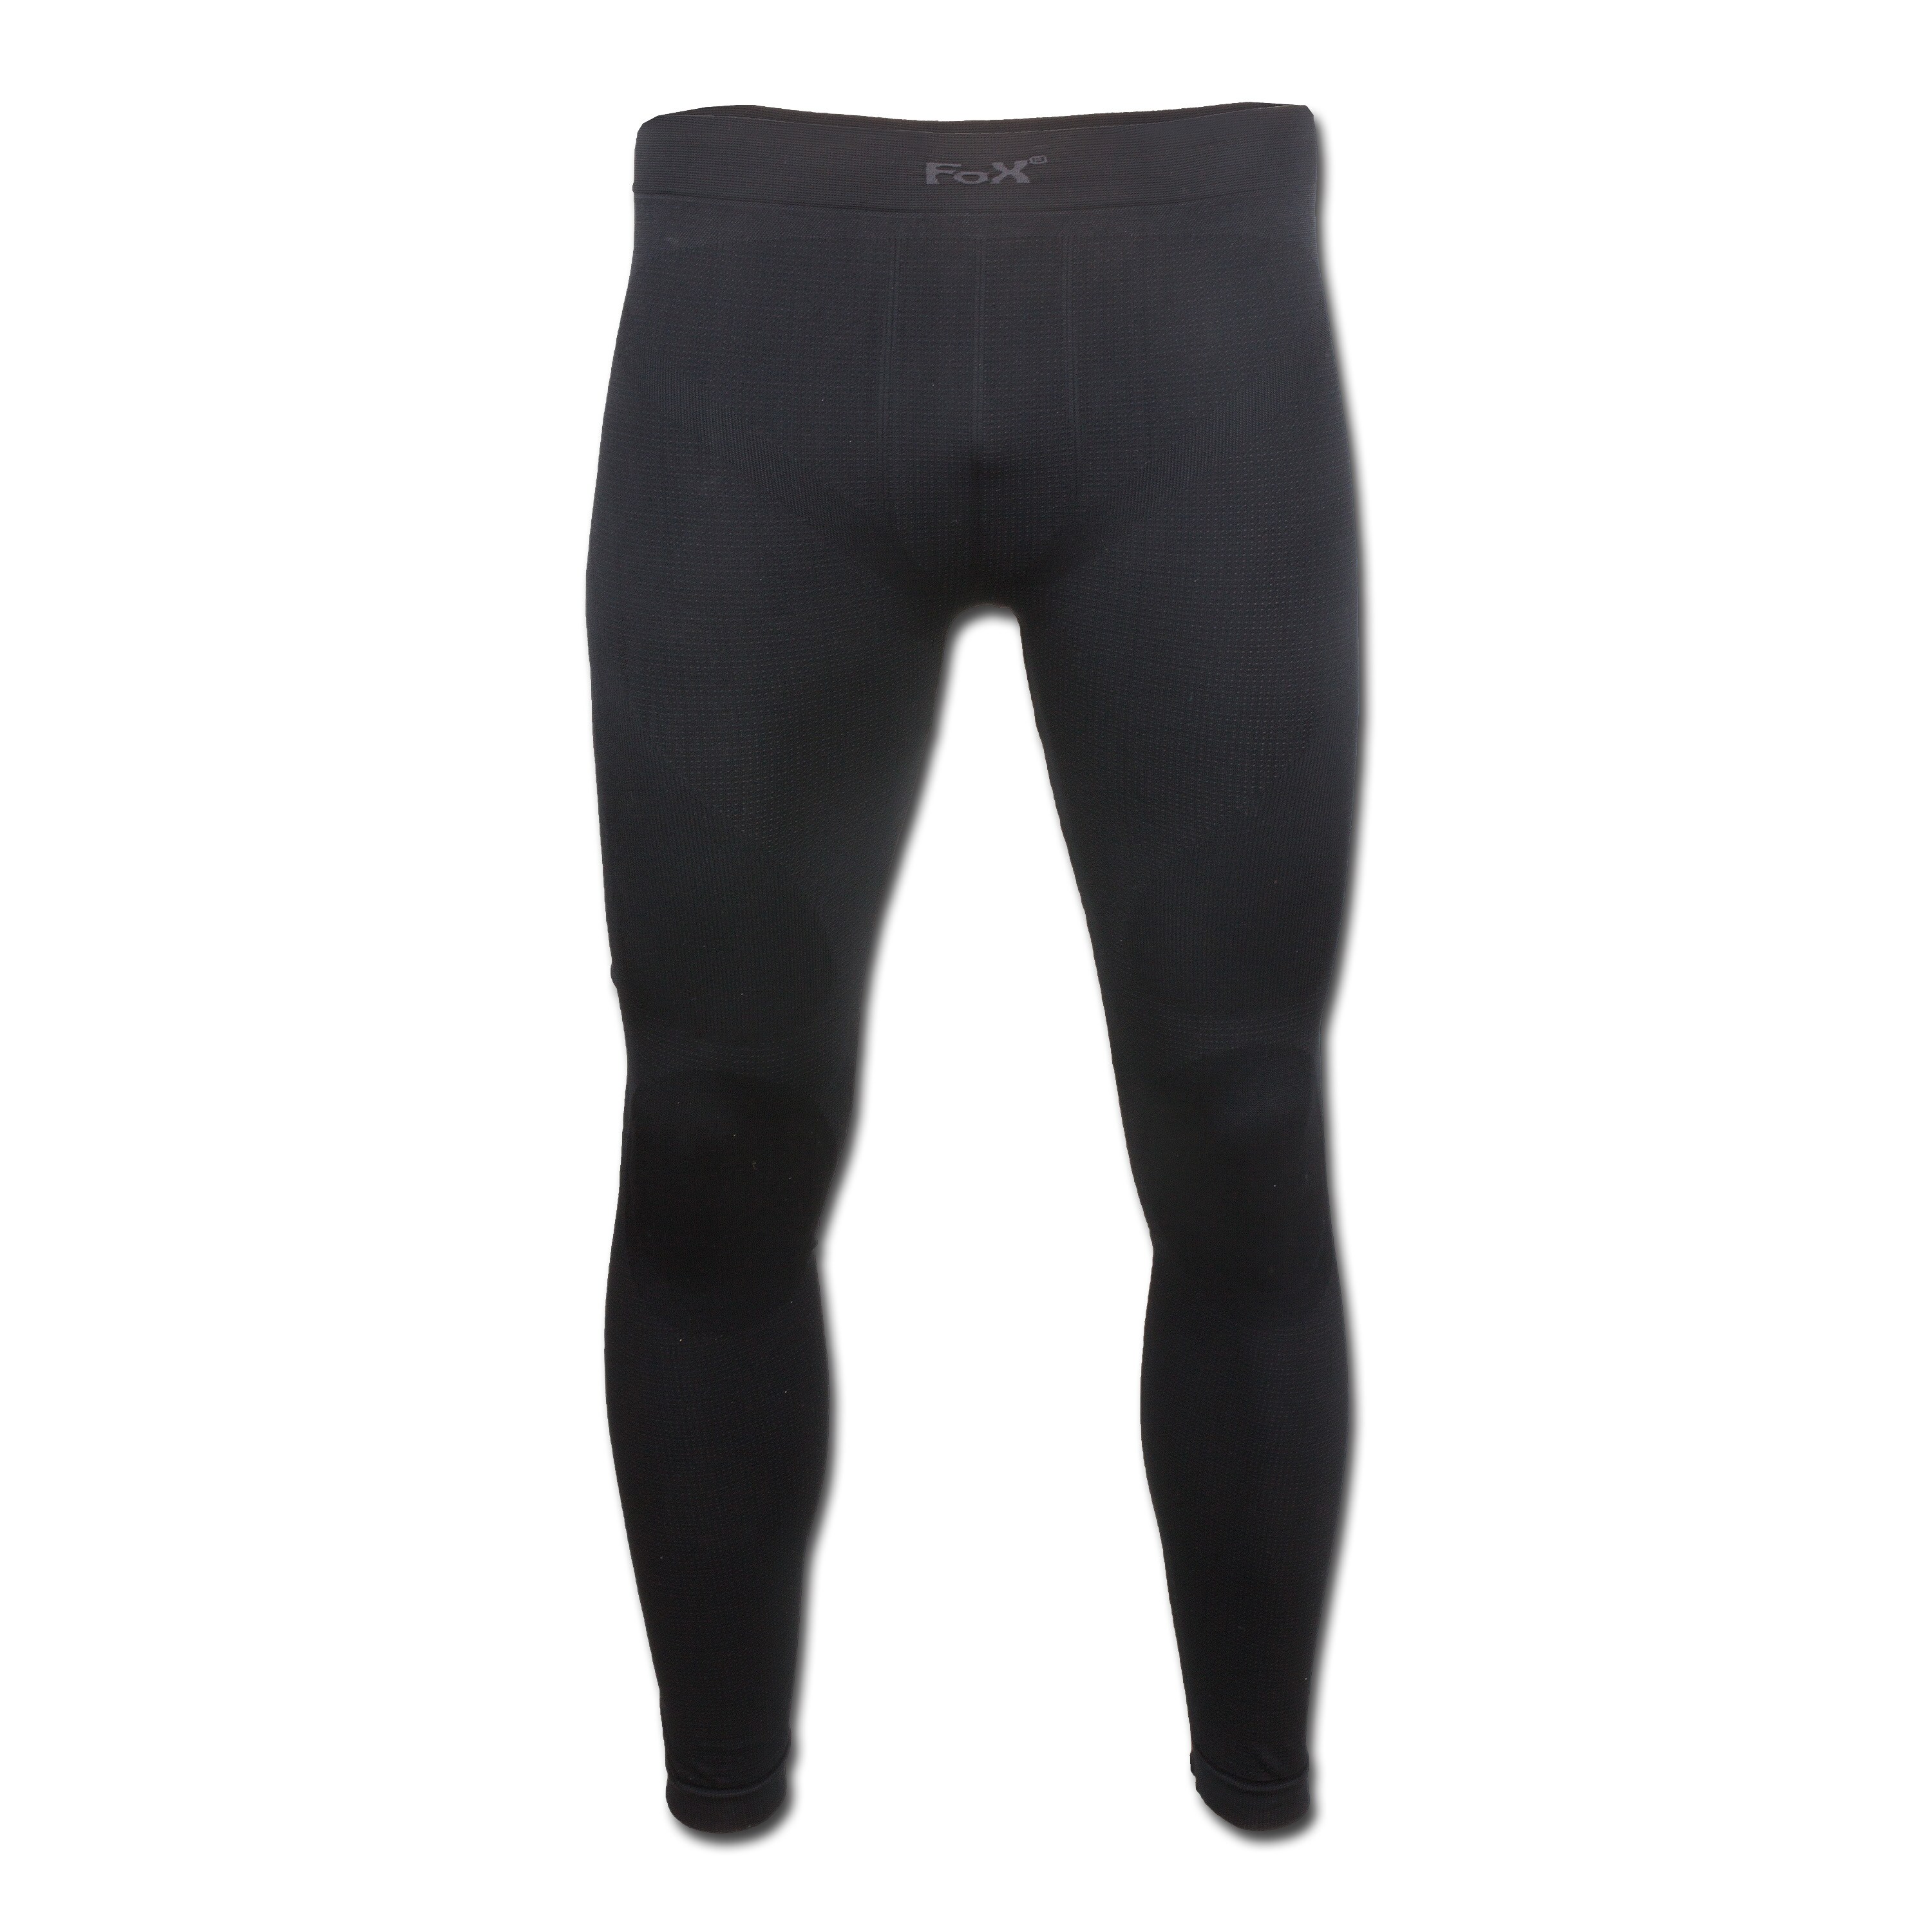 Purchase the Sport Functional Underwear black by ASMC